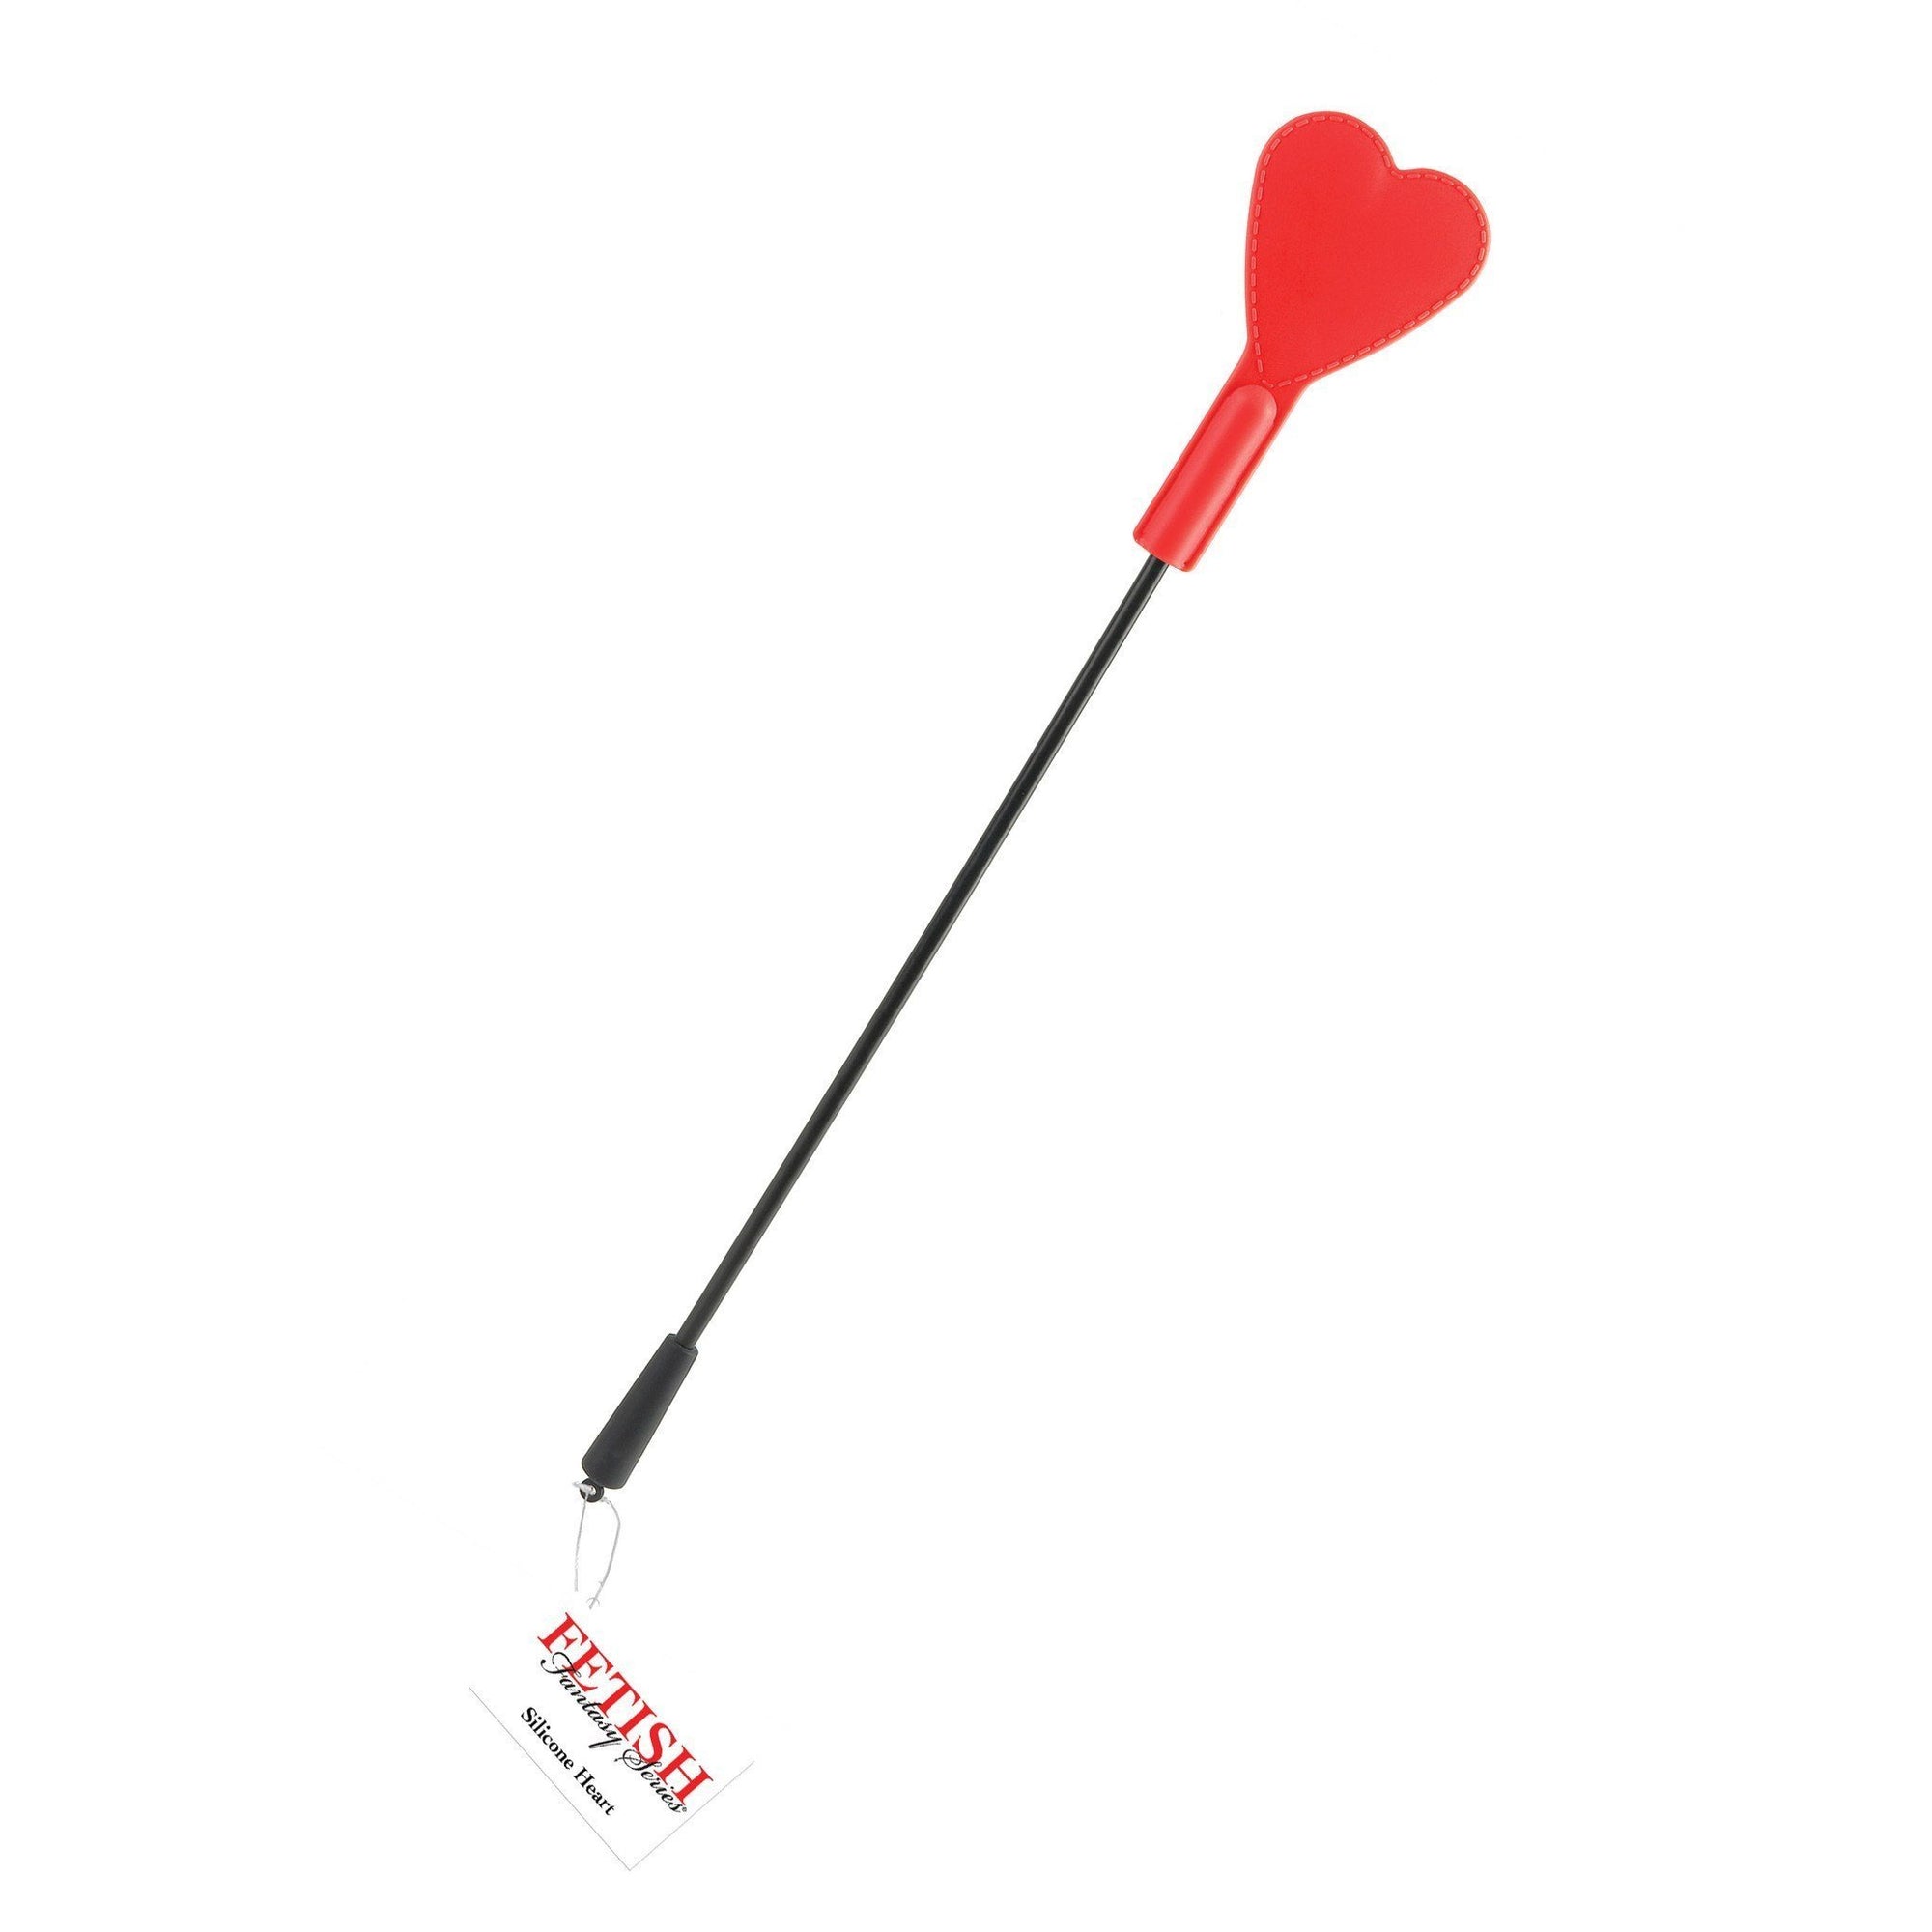 Pipedream - Fetish Fantasy Series Silicone Heart Flapper (Red) Paddle - CherryAffairs Singapore